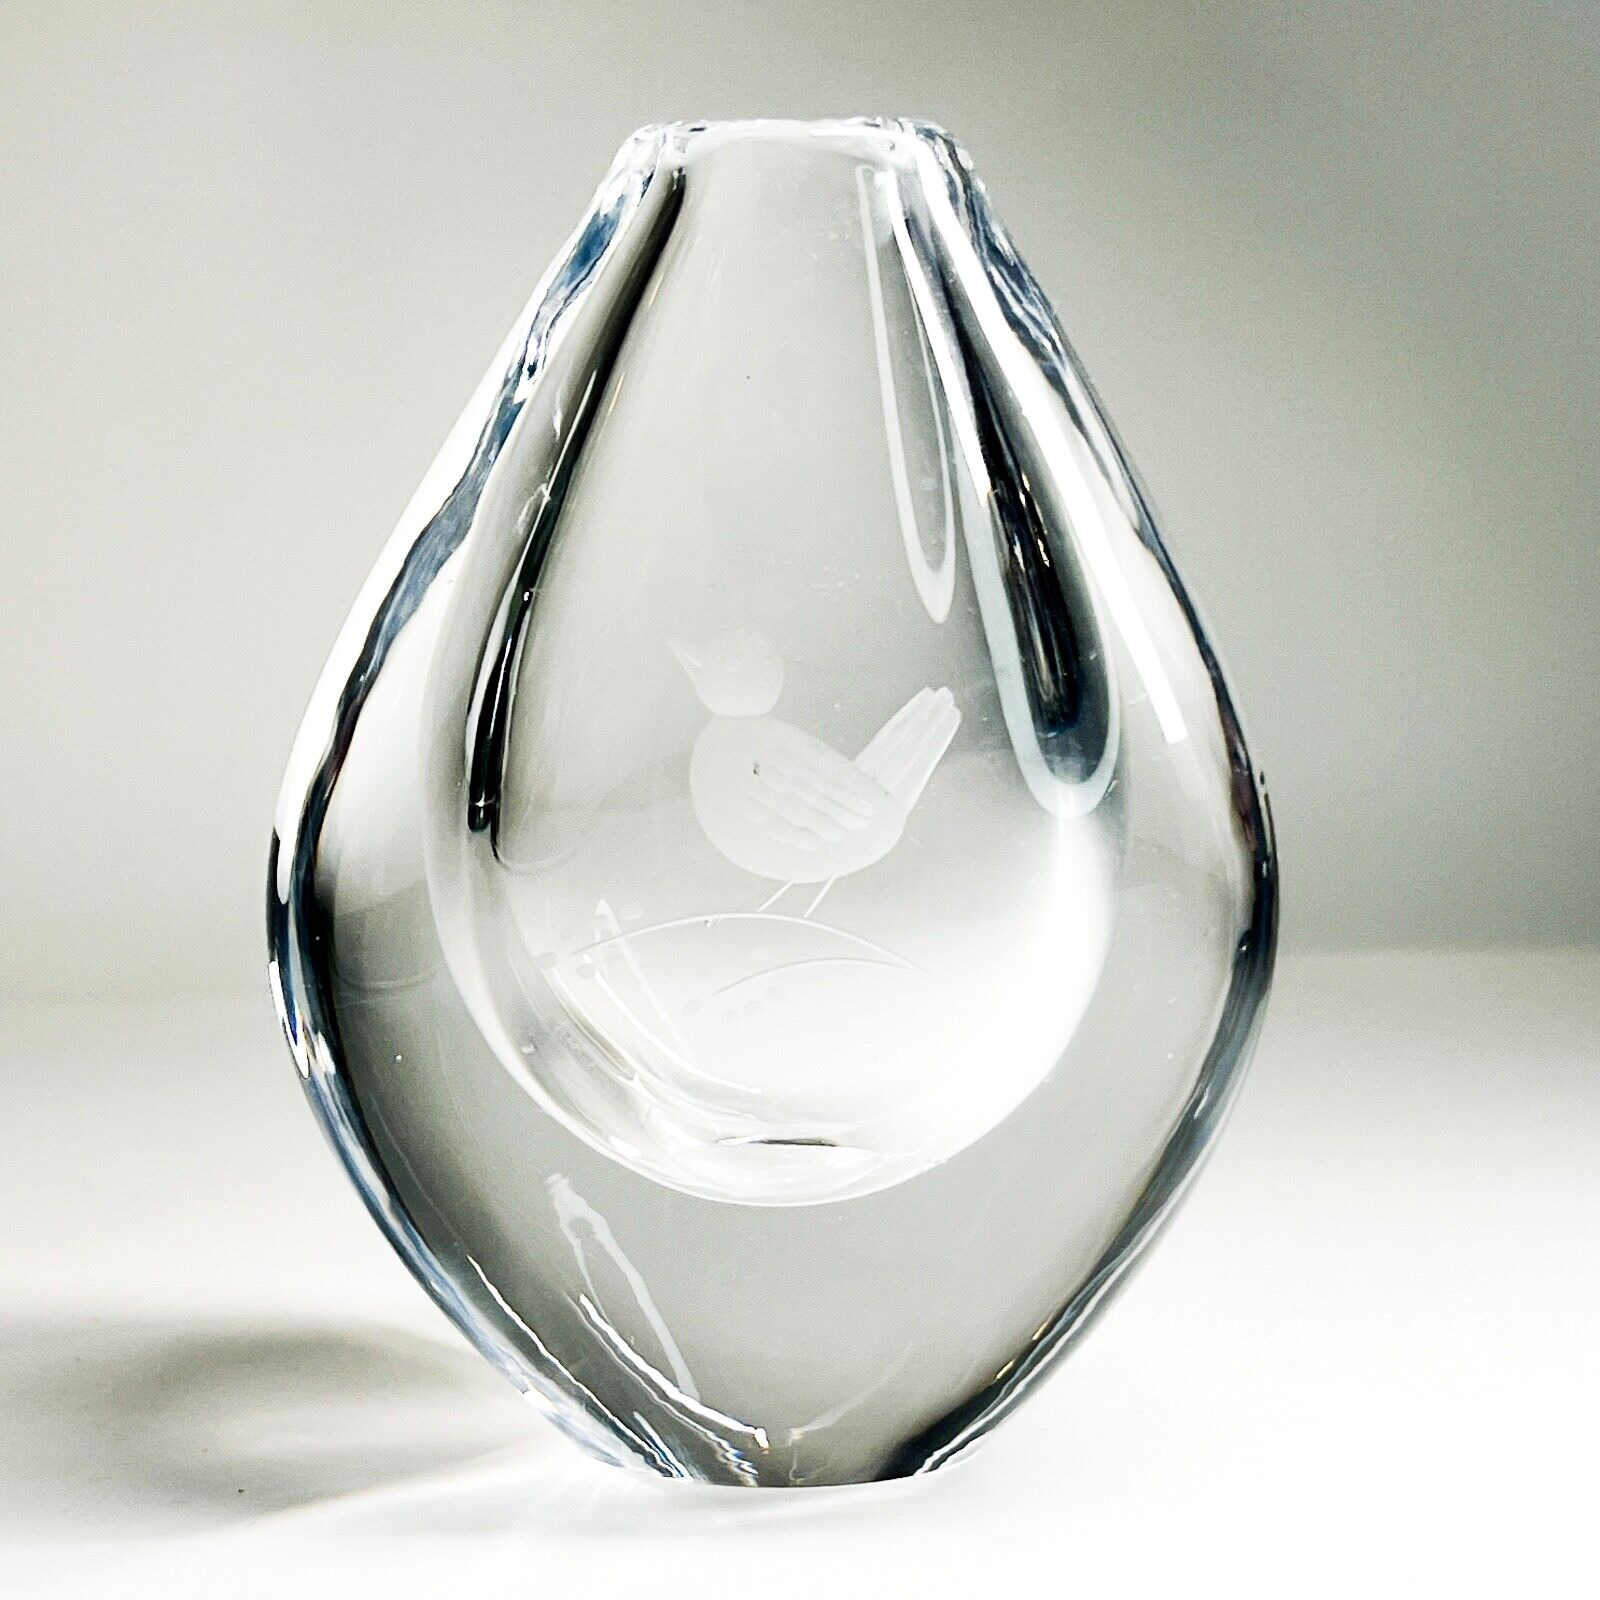 Orrefors Crystal Palmquist Teardrop Vase Bird on Branch Etched Signature Signed